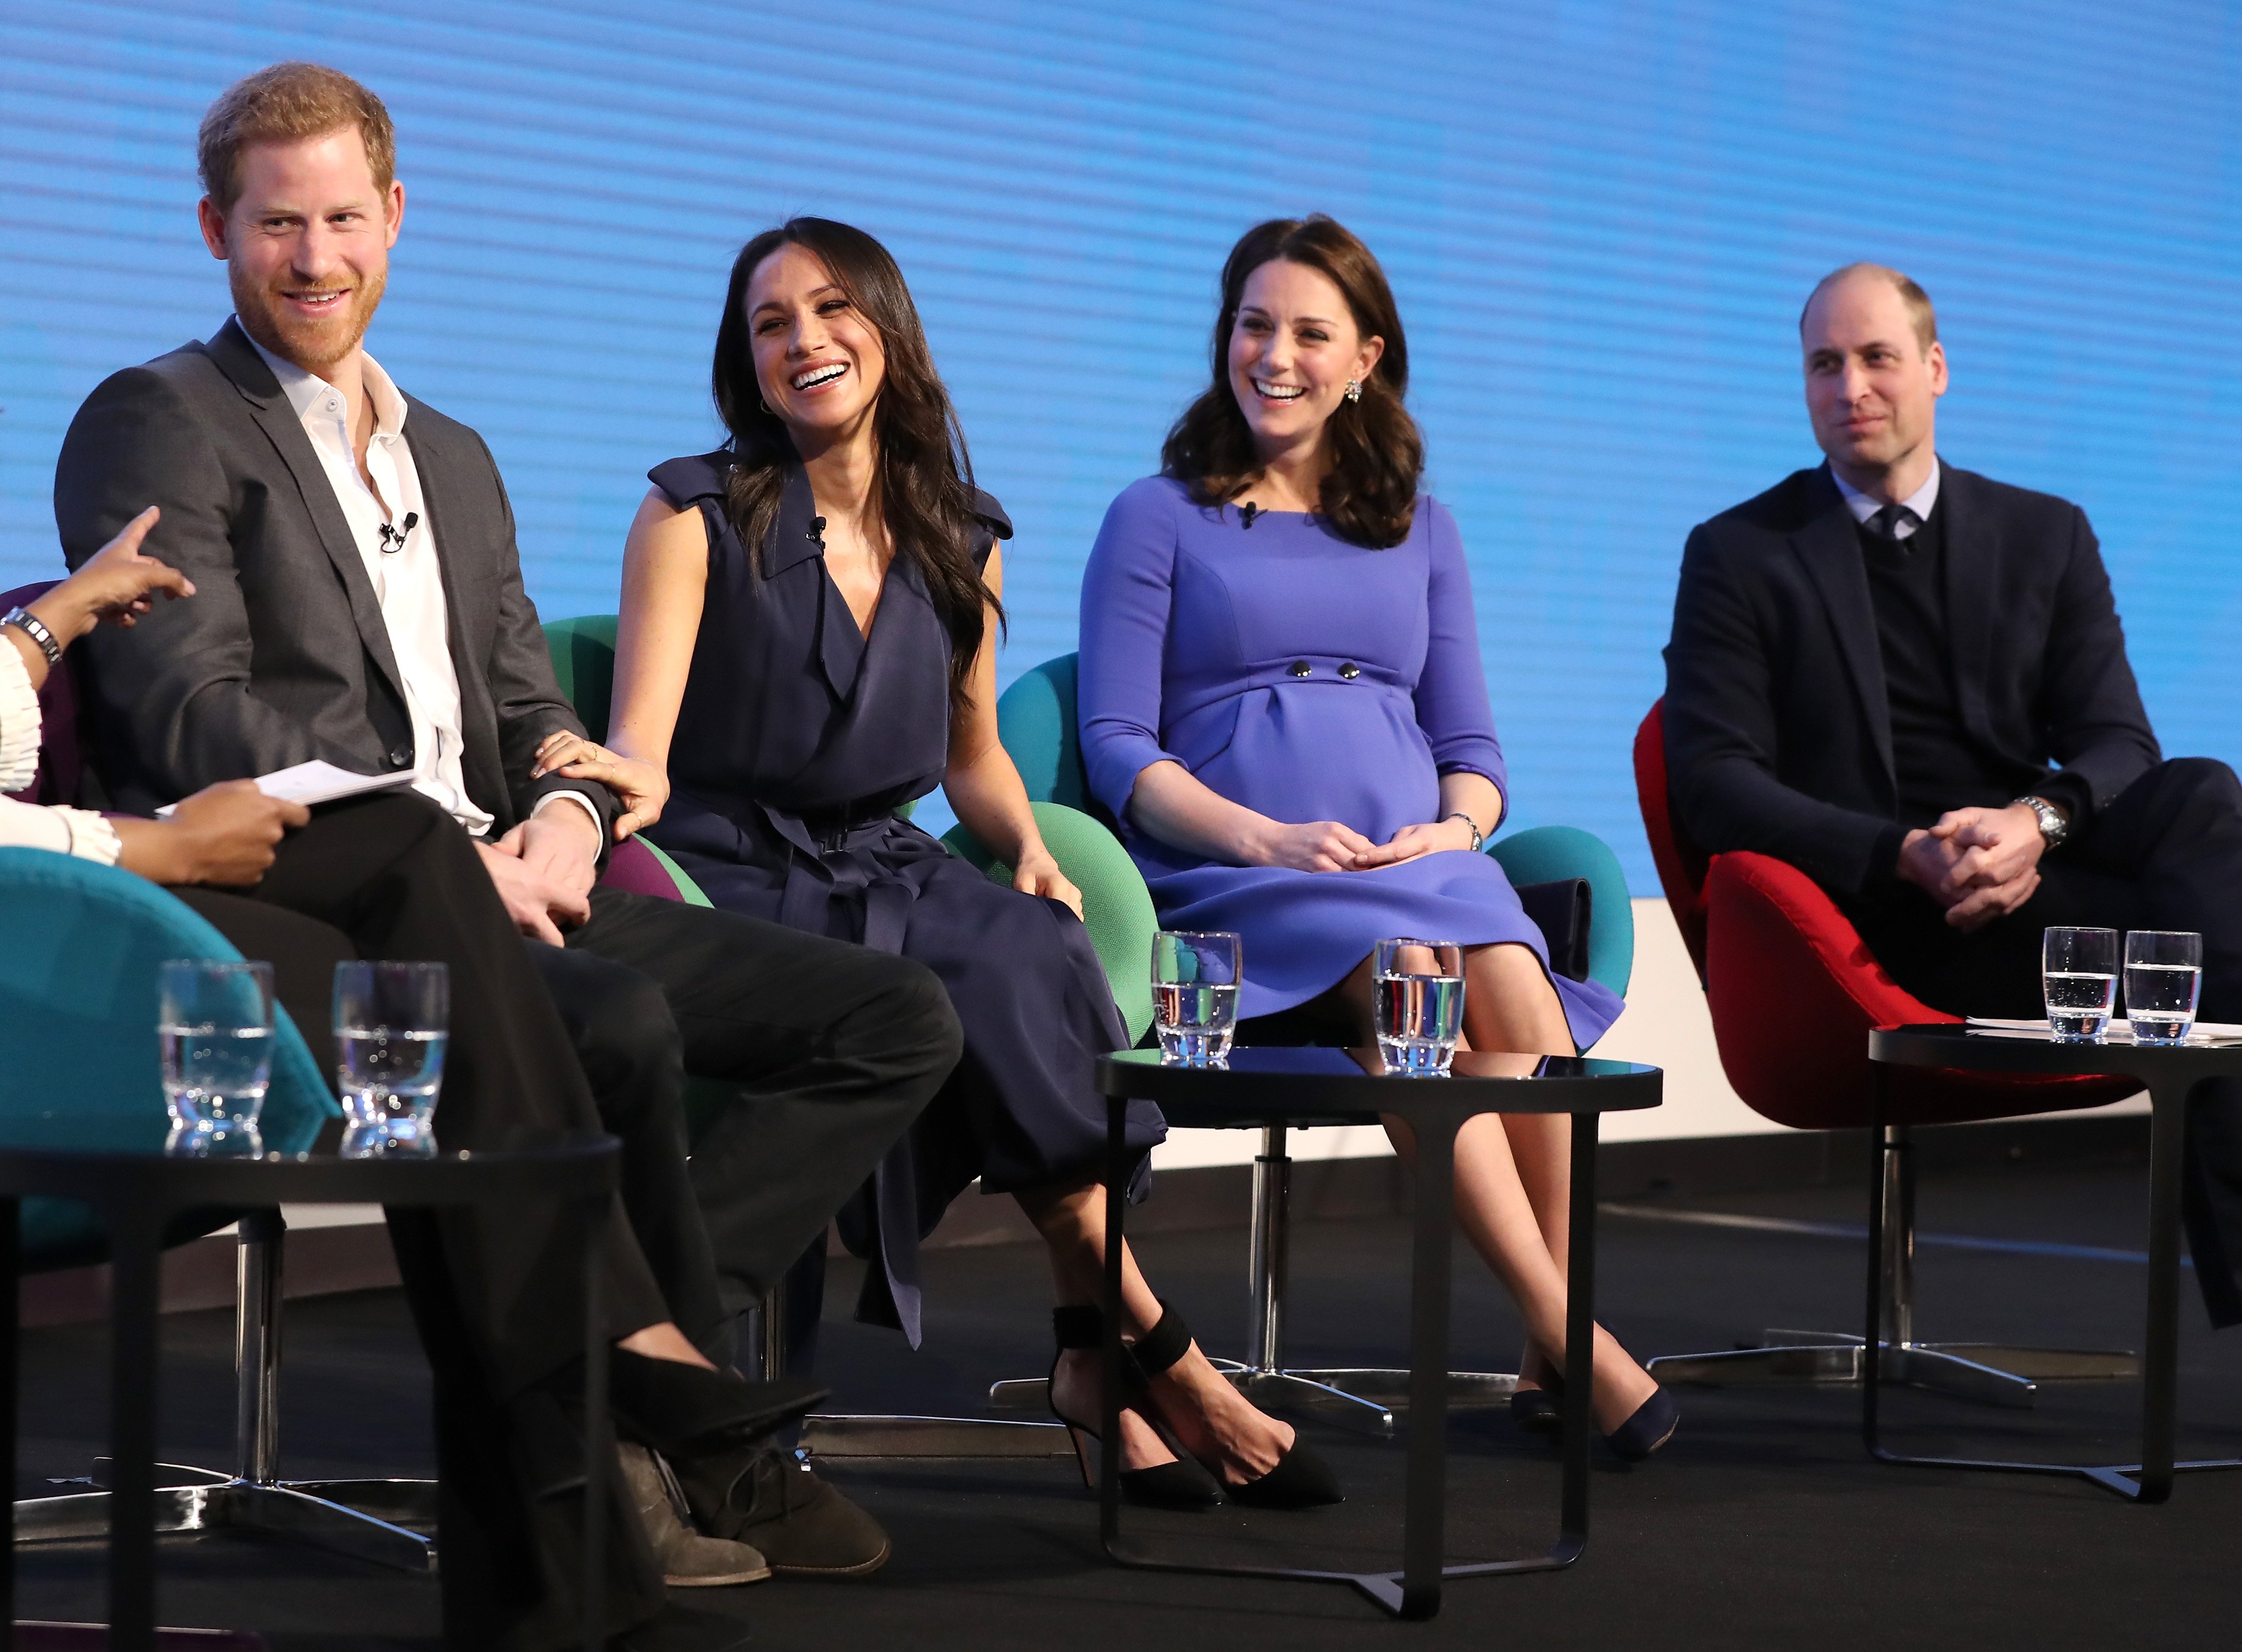 Prince Harry, Meghan Markle, Duchess Kate, and Prince William at the first annual Royal Foundation Forum on February 28, 2018, in London, England. | Source: Getty Images